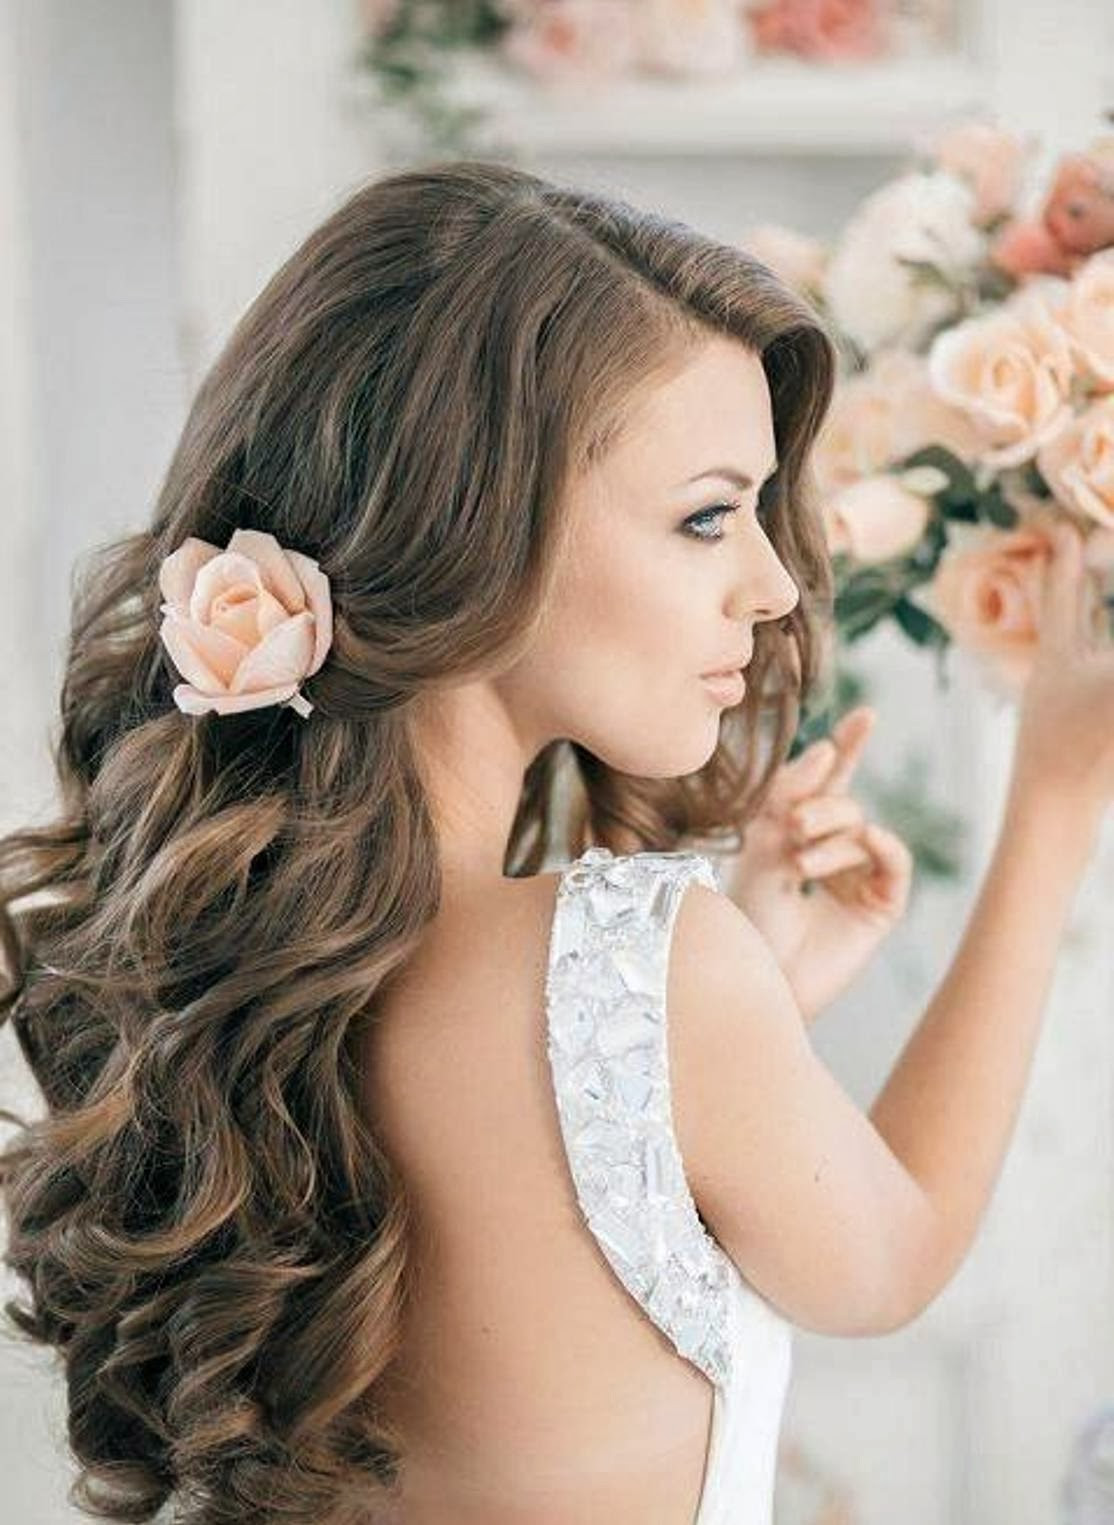 Wedding Hairstyles For Long Hair
 Curly hairstyles for long hair women Hair Fashion Style